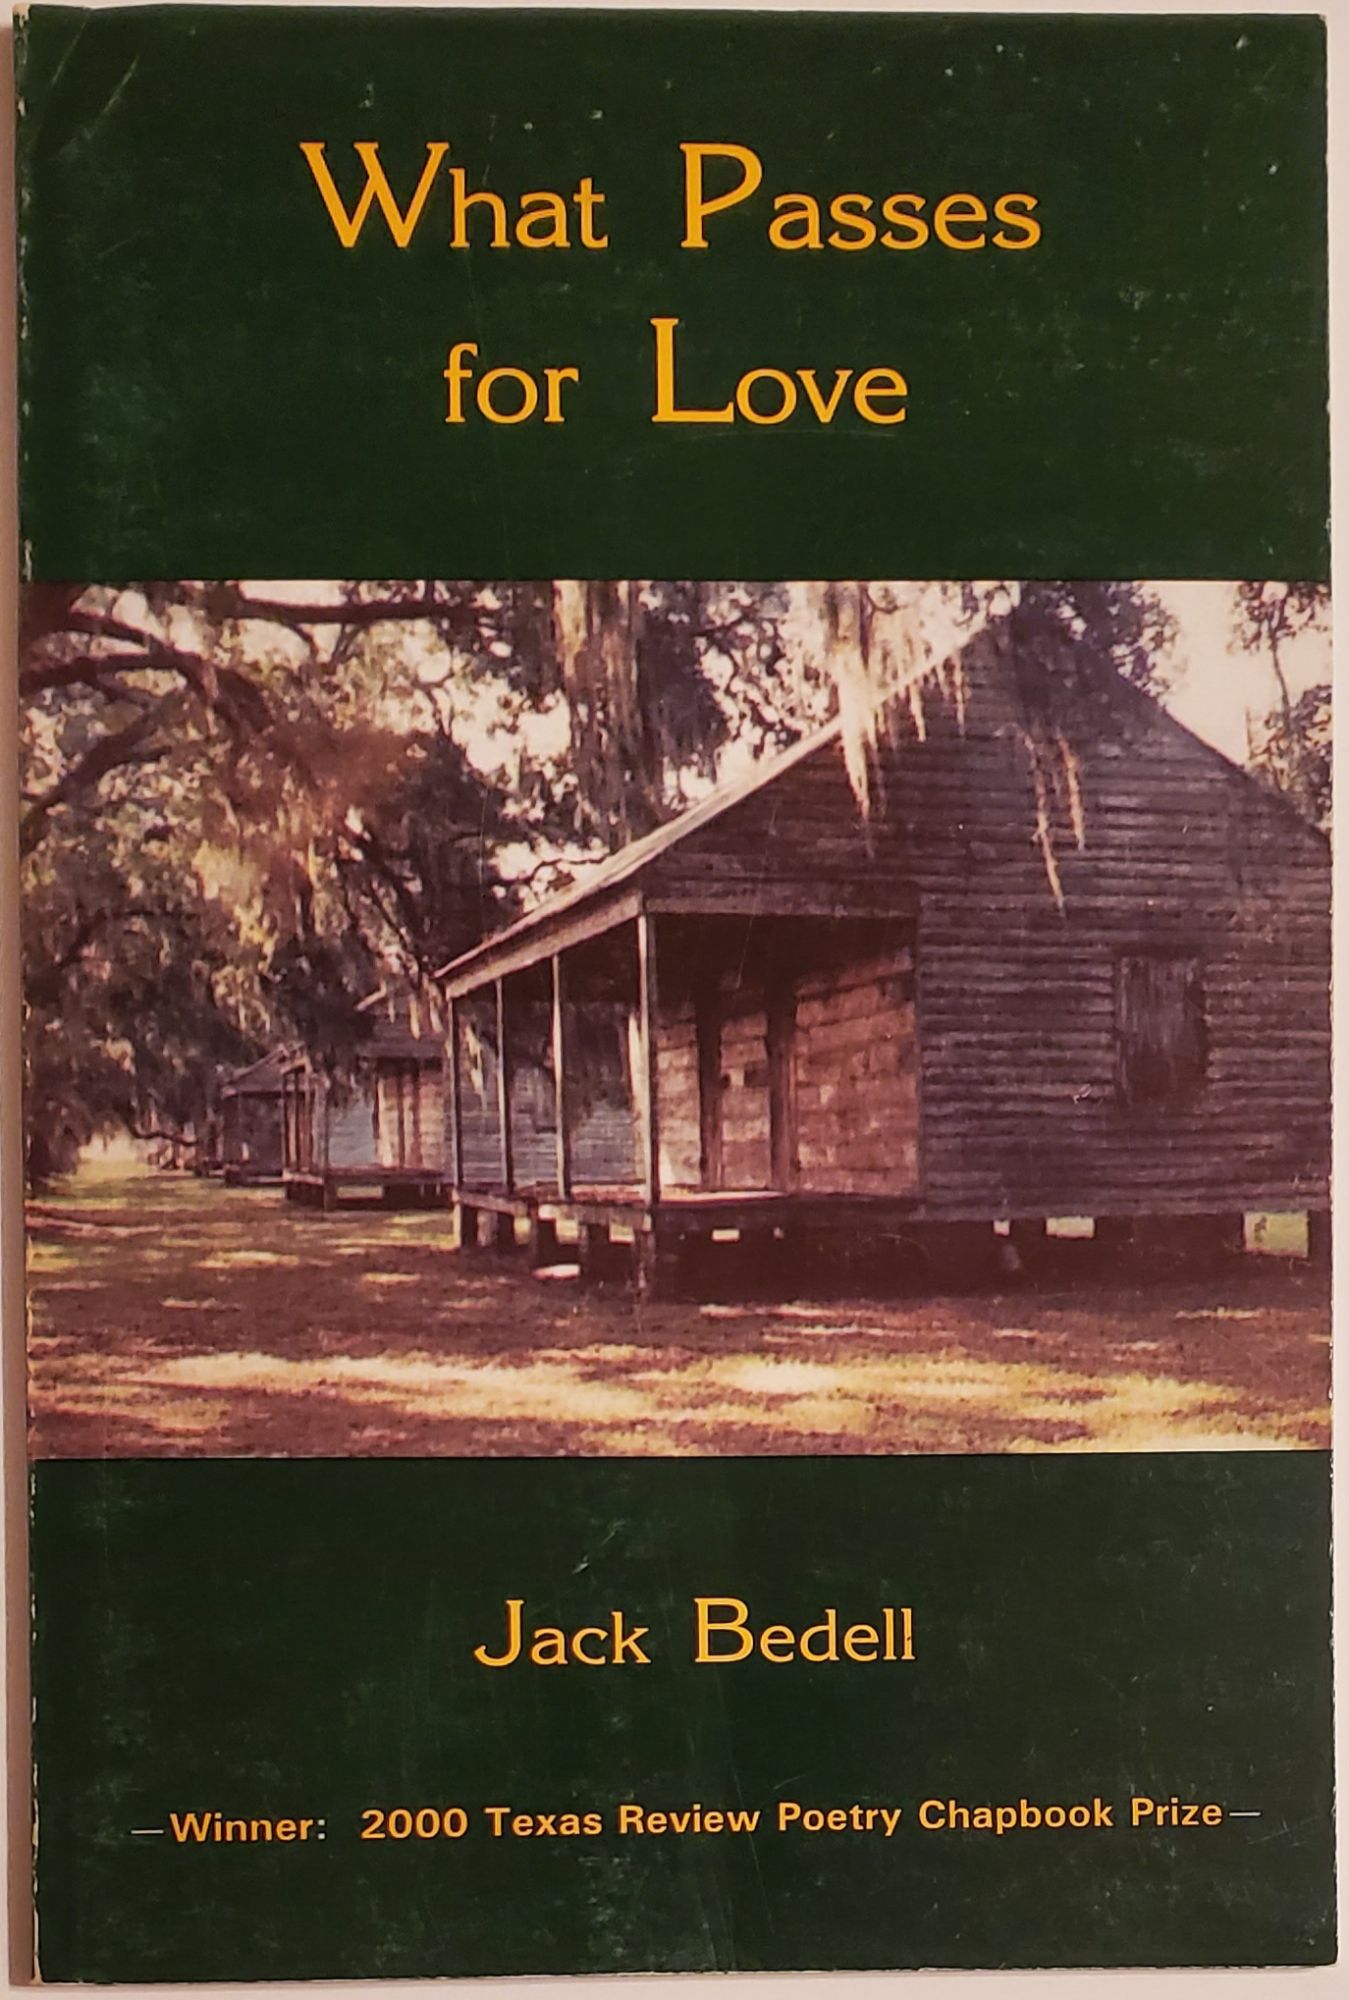 [Book #29253] WHAT PASSES FOR LOVE. Jack Bedell.